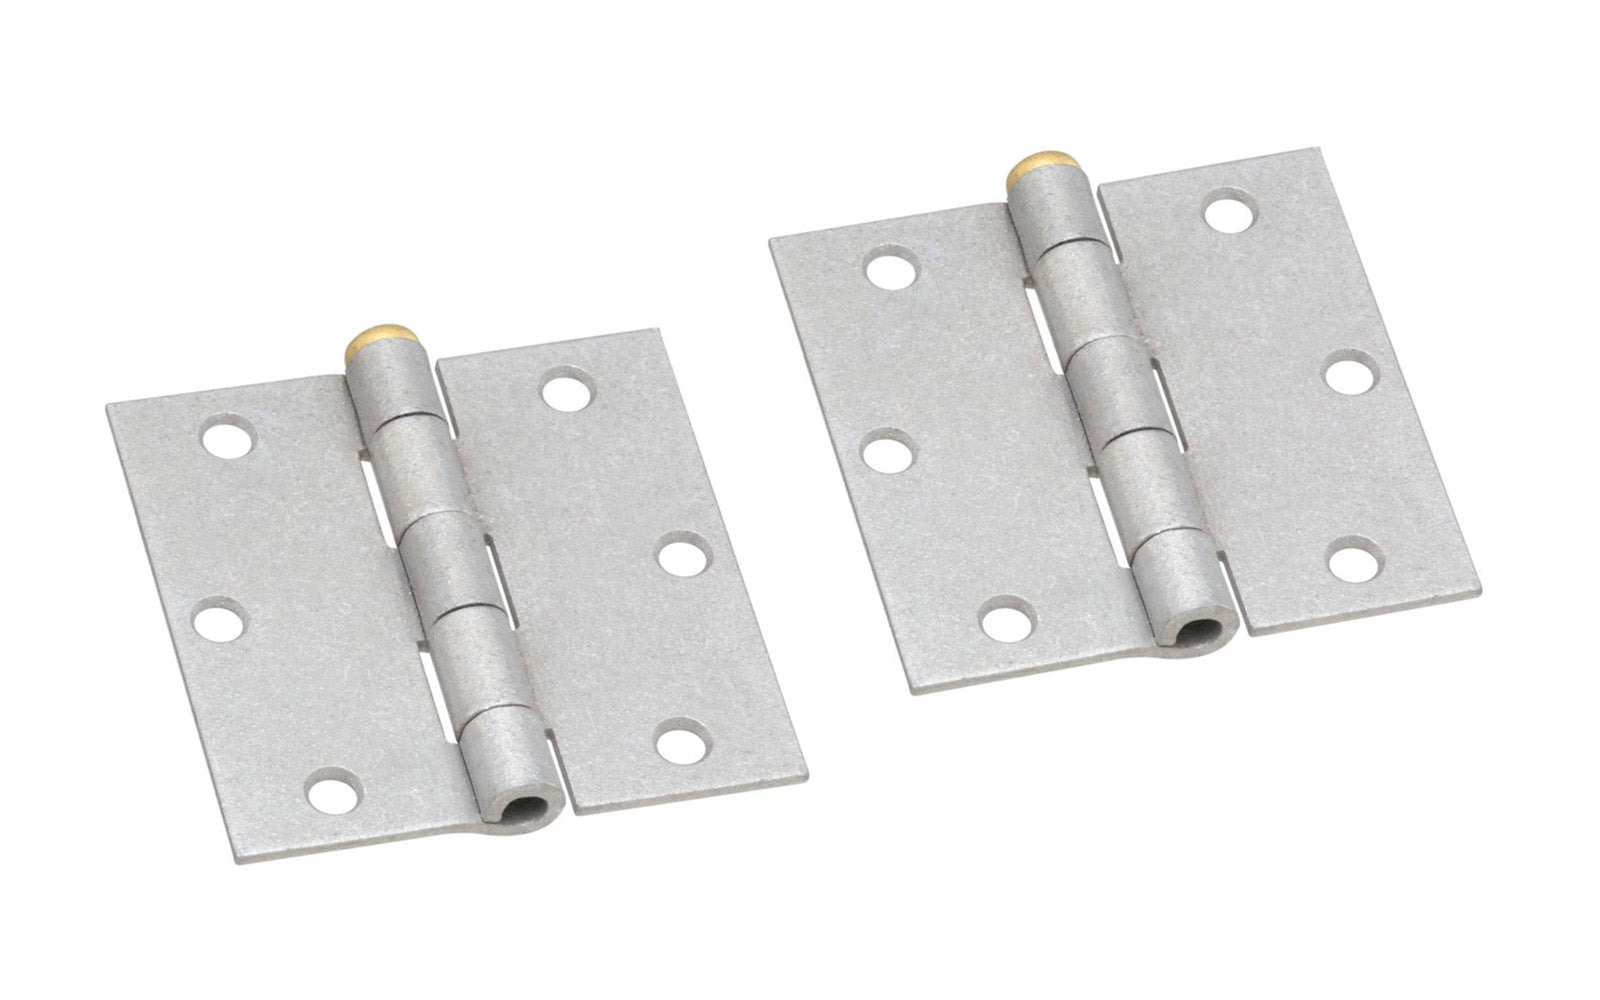  A pair of 3-1/2" galvanized door hinges with removable brass pins. Broad hinge is designed for general utility & industrial applications. Hinges are swaged for mortise installations. Manufactured from hot rolled steel for durability. 2 pack of galvanized hinges. Stanley National Hardware Model N208-843. 038613208841. 